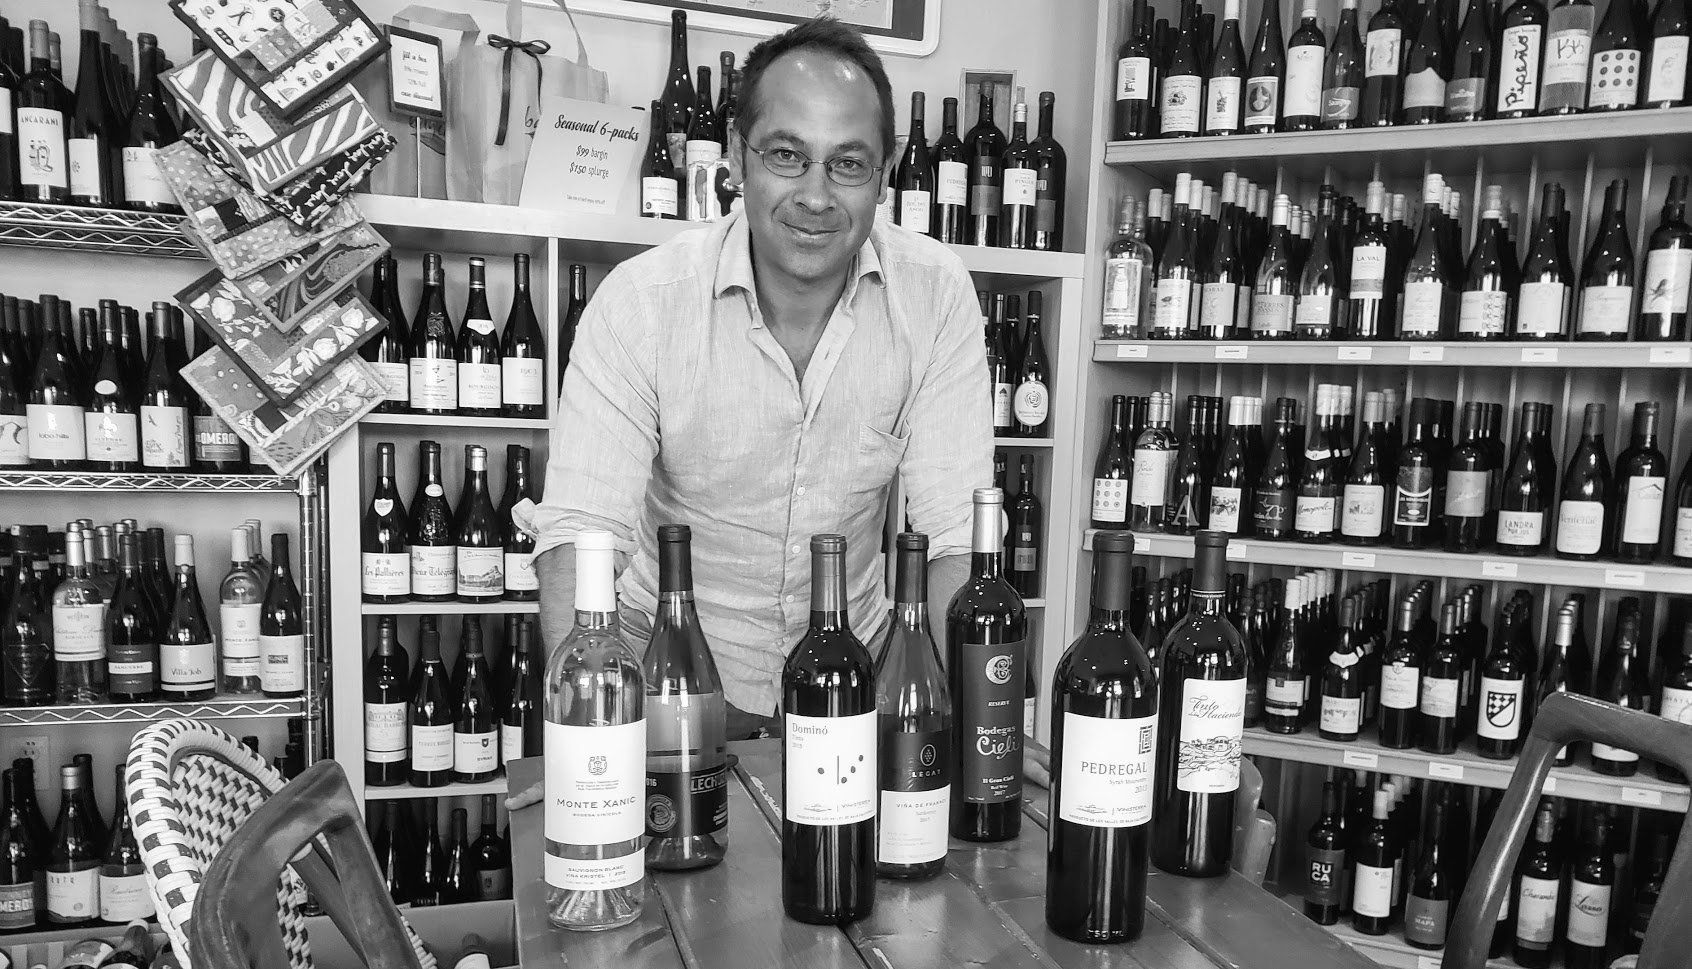 Beso Imports with Patrick Neri, we welcome back this amazing portfolio featuring summer focused wines.